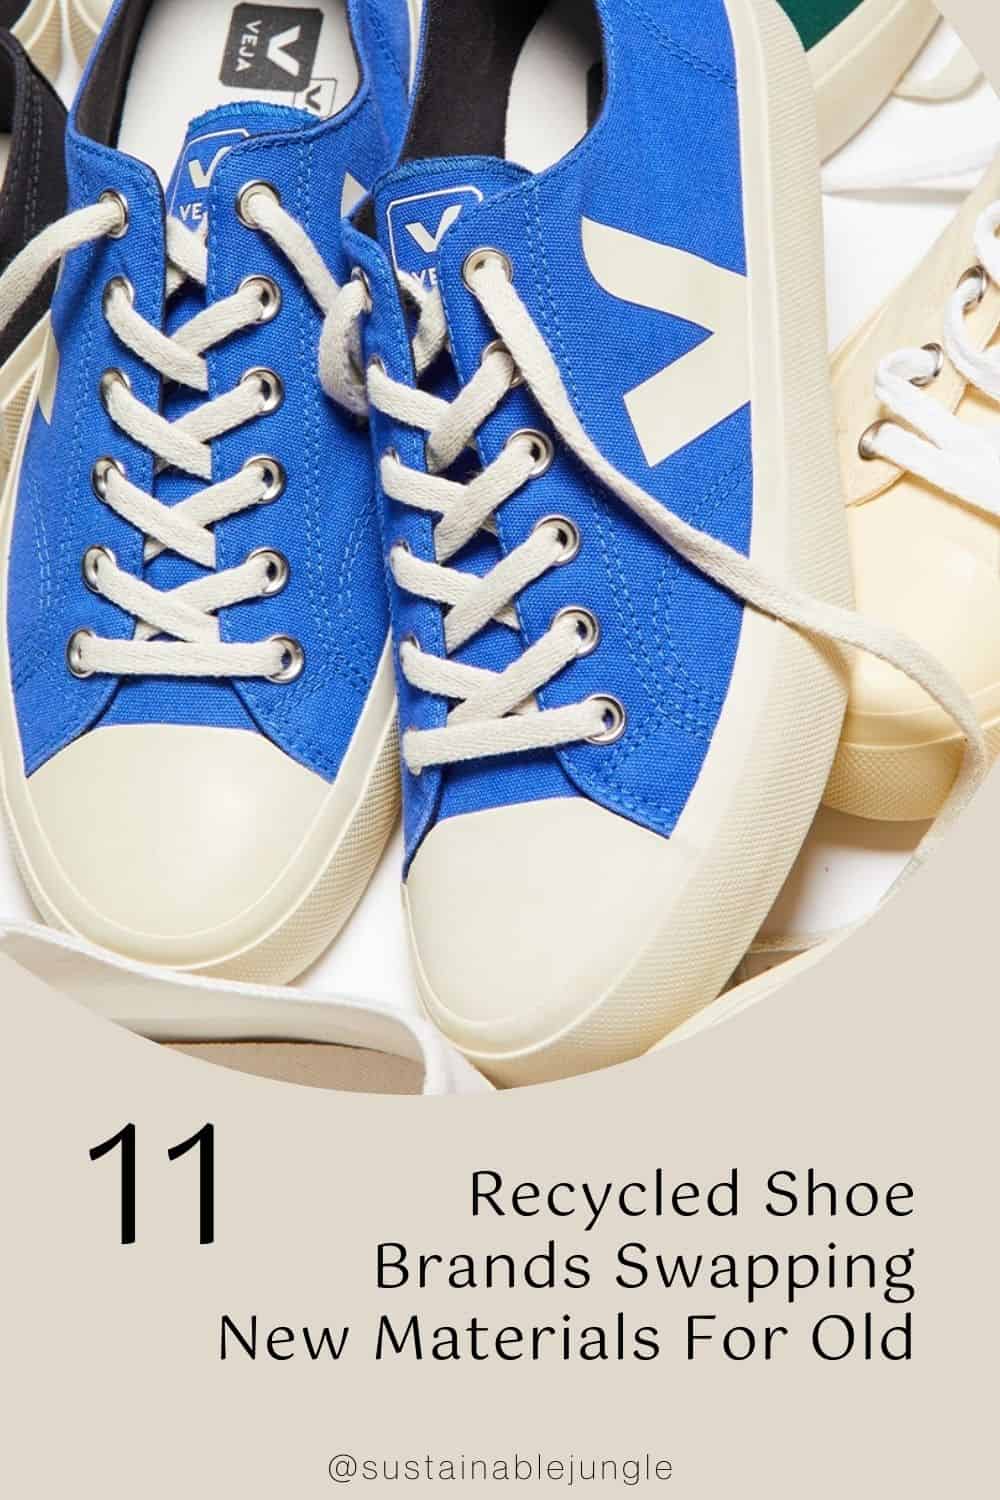 11 Recycled Shoe Brands Swapping New Materials For Old Image by VEJA #recycledshoes #shoesmadeofrecycledplastic #recycledplasticshoes #recycledshoebrands #recycledmaterialshoes #shoesmadefromrecycledmaterials #sustainablejungle